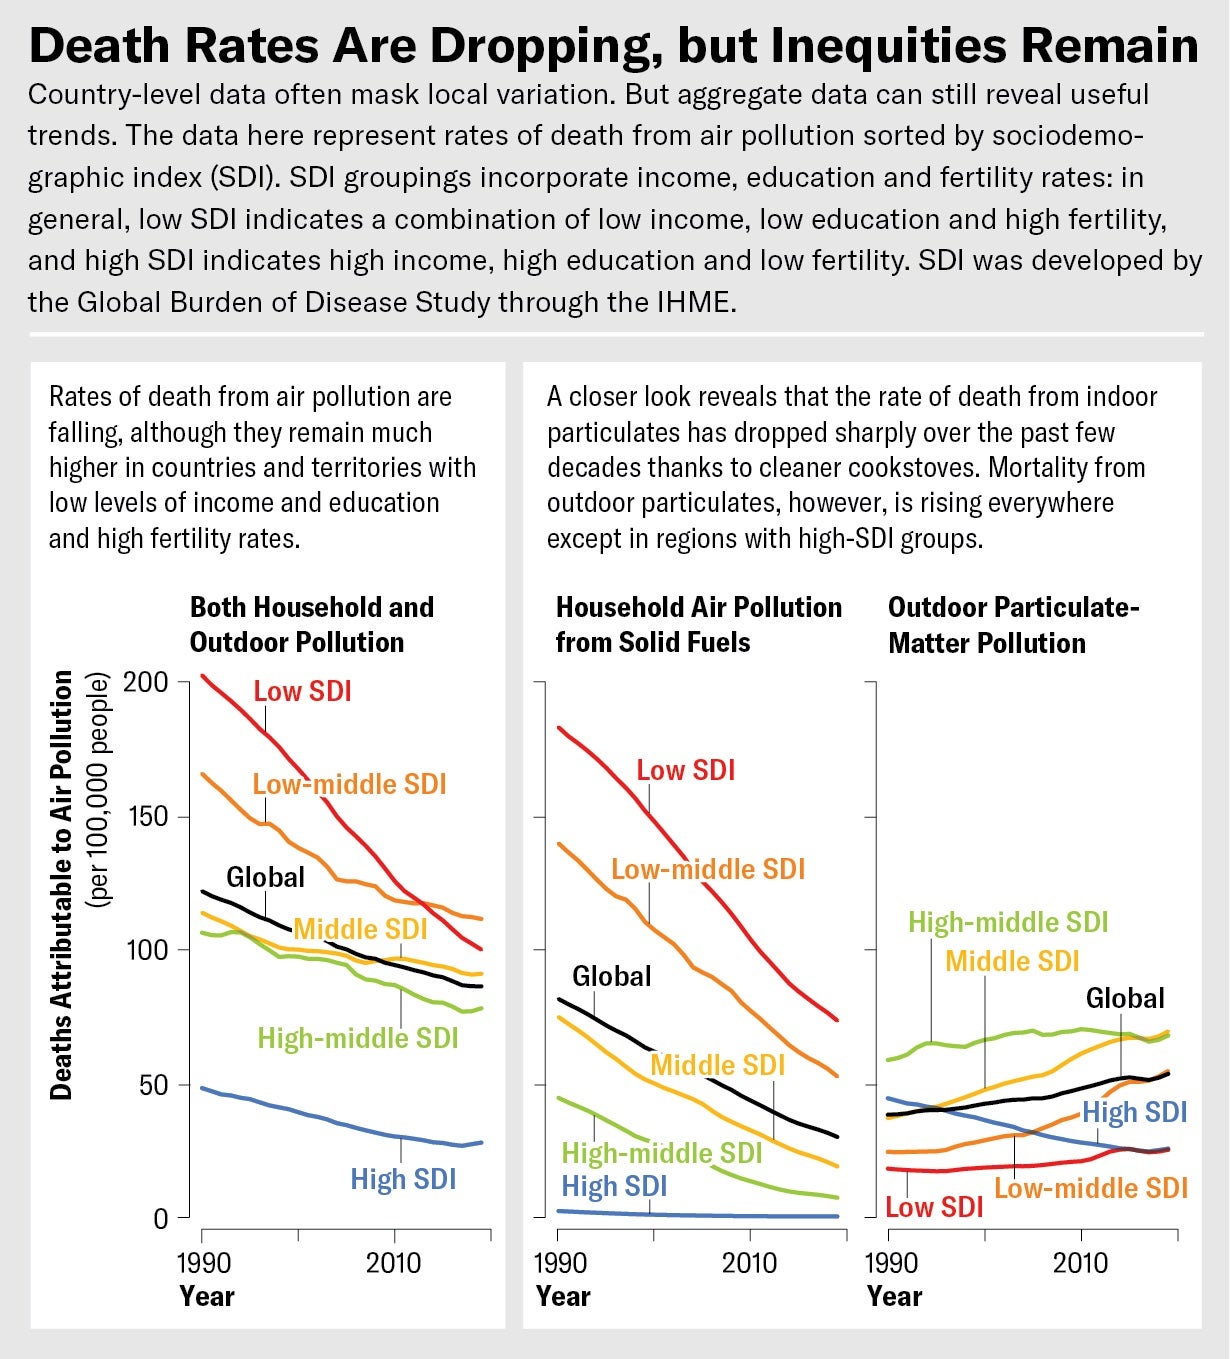 Line charts show rates of death from air pollution sorted by sociodemographic index. Rates of death from air pollution are falling overall, largely due to a sharp drop in deaths associated with indoor particulates. Mortality from outdoor particulates, however, is rising everywhere except in regions with high levels of income and education and low fertility rates.